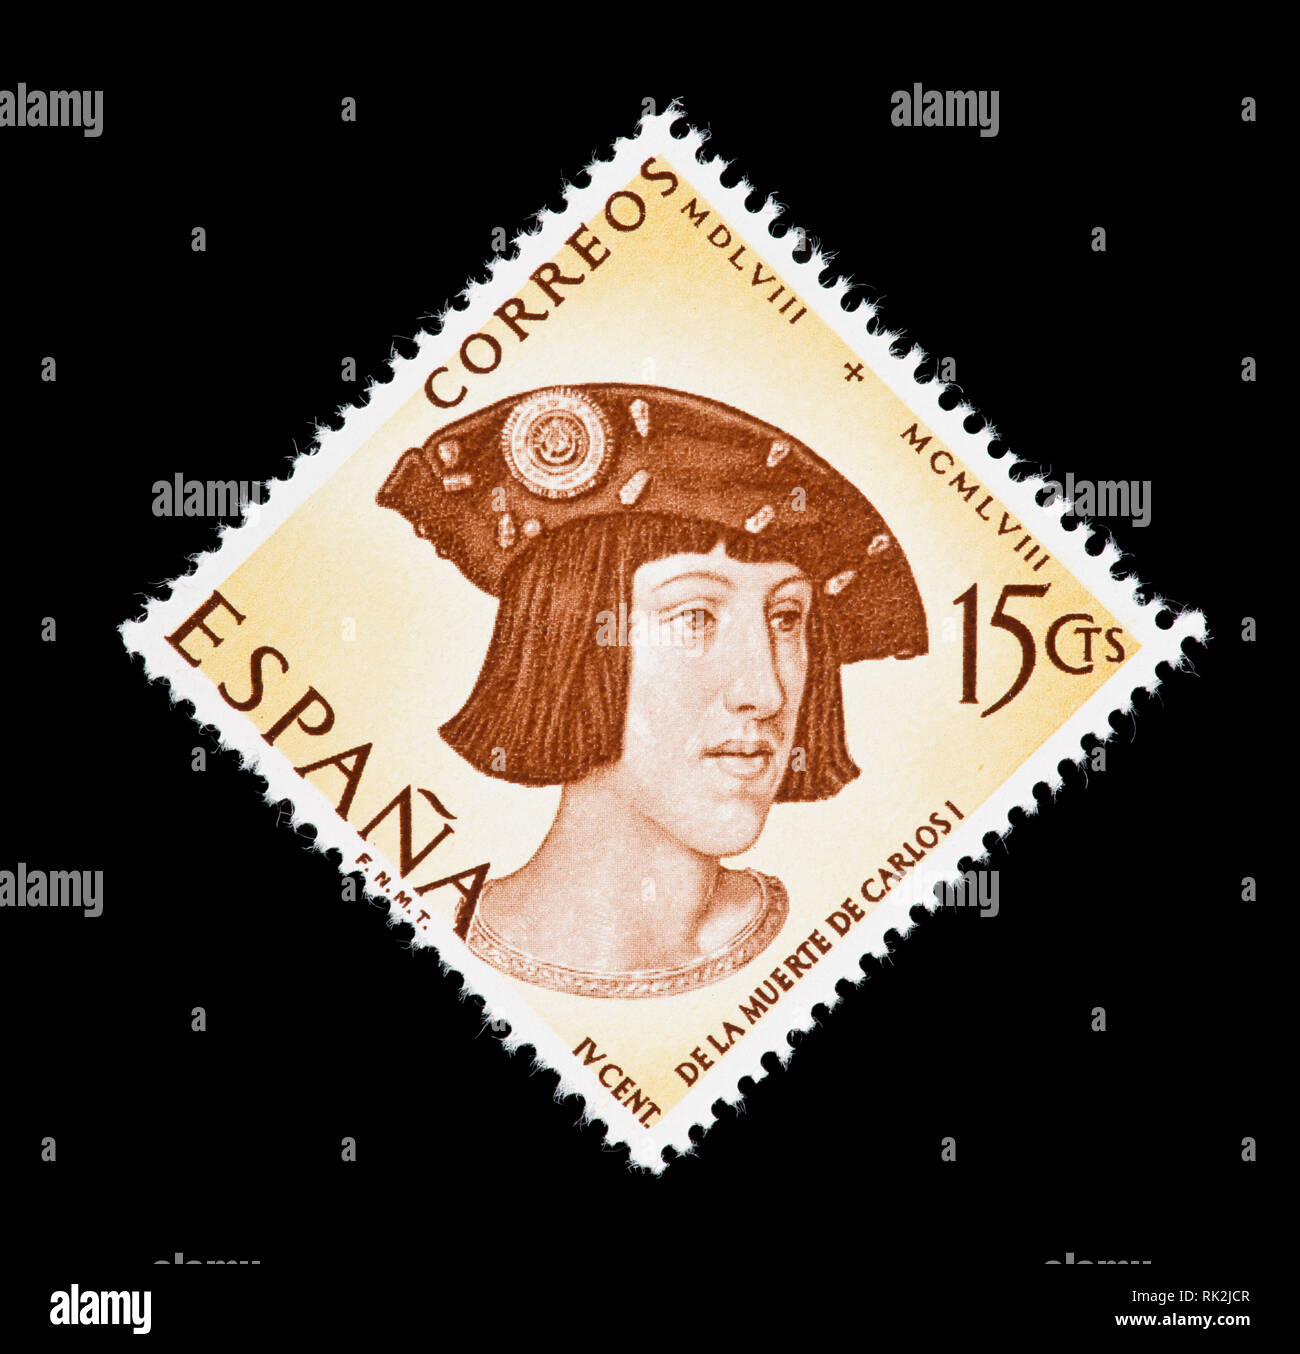 Postage stamp from Spain depicting Charles V on the 400th anniversary of his death. Stock Photo